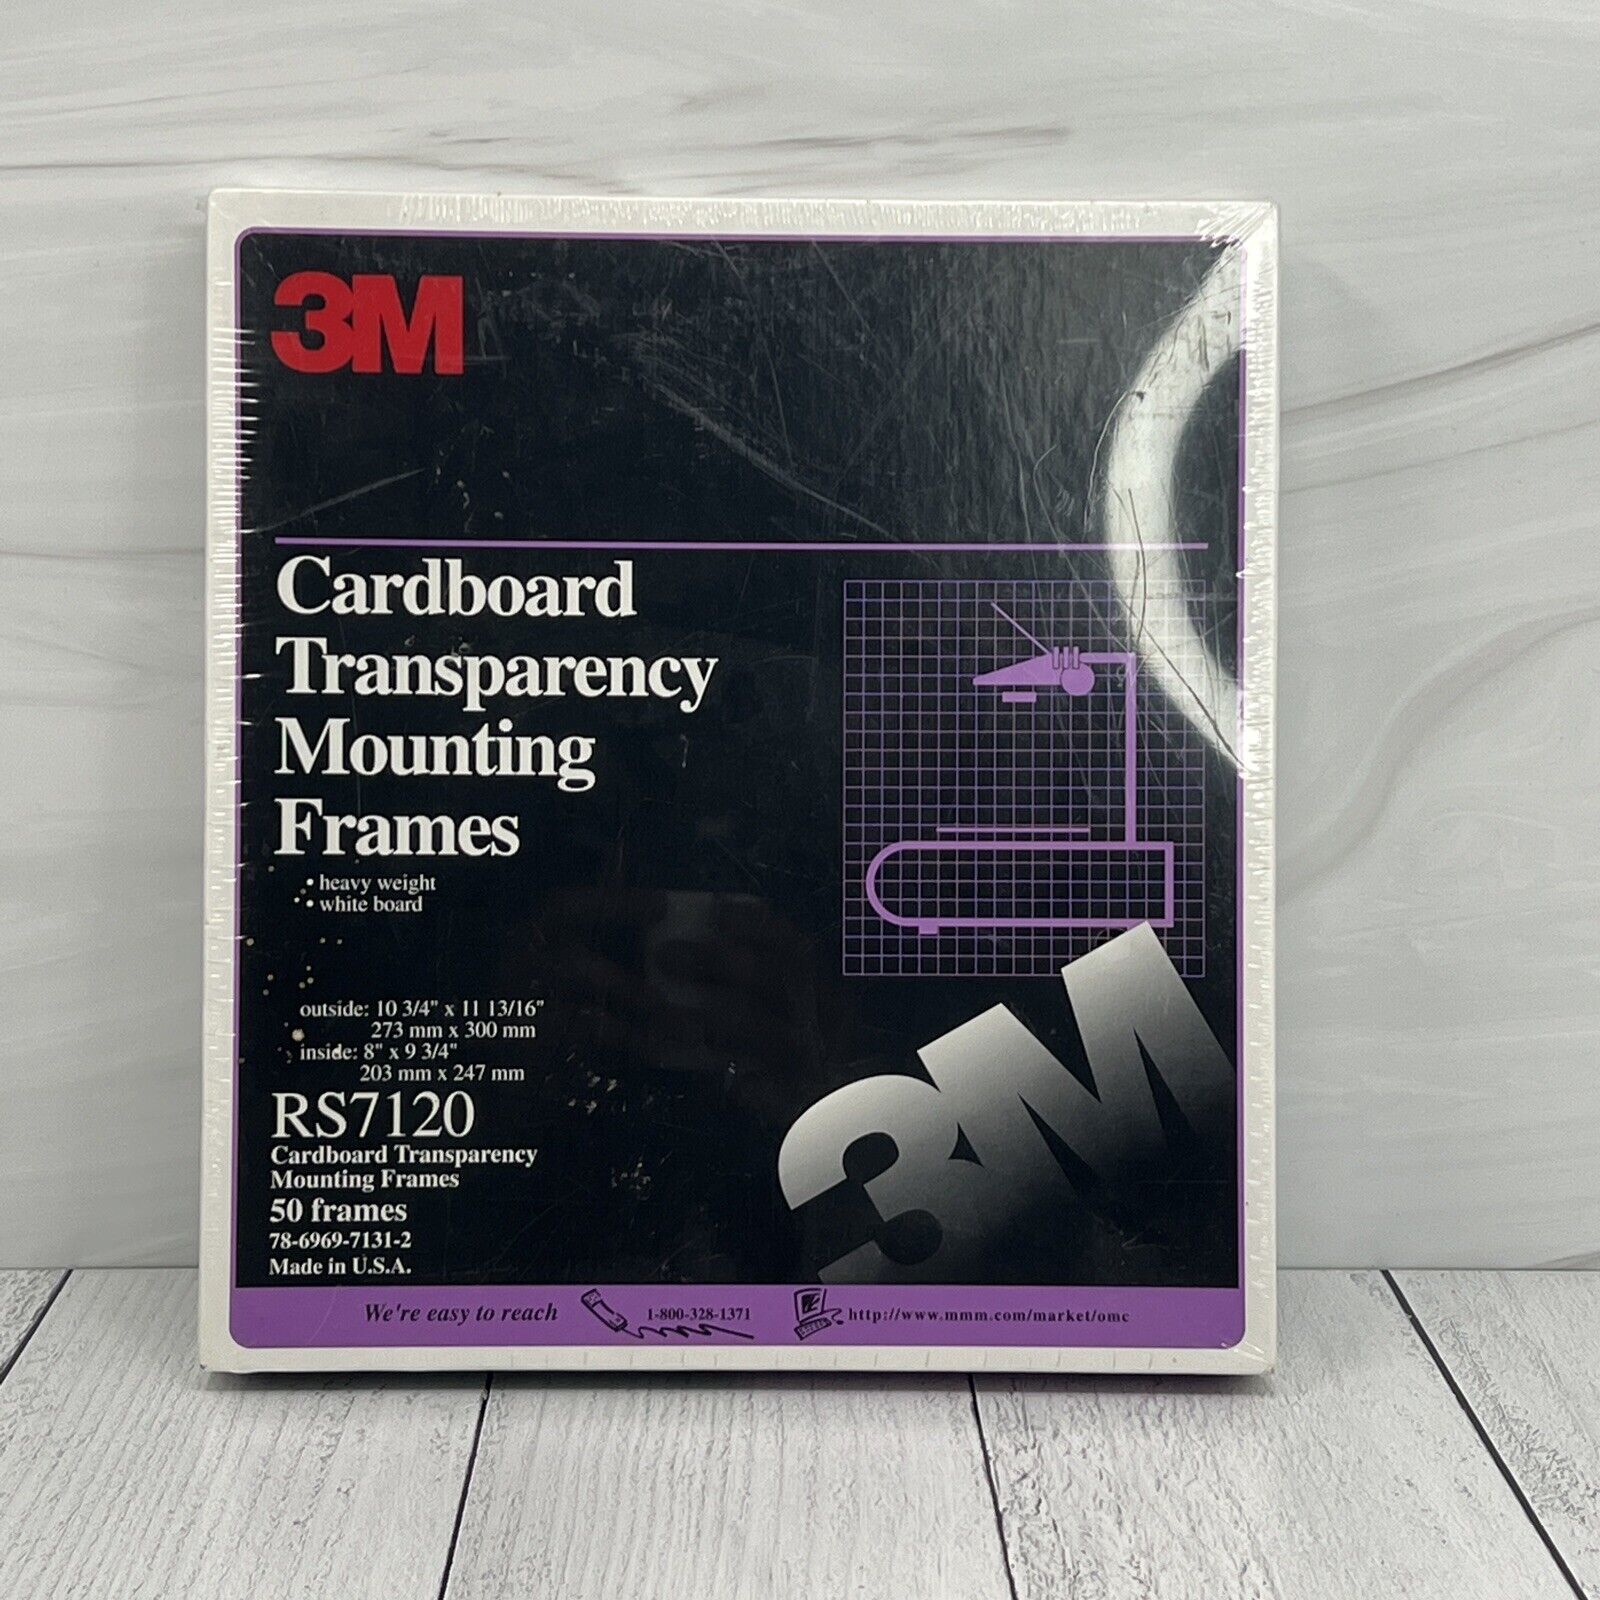 3m Cardboard Transparency Mounting 50 Frames Rs 7120  New Sealed